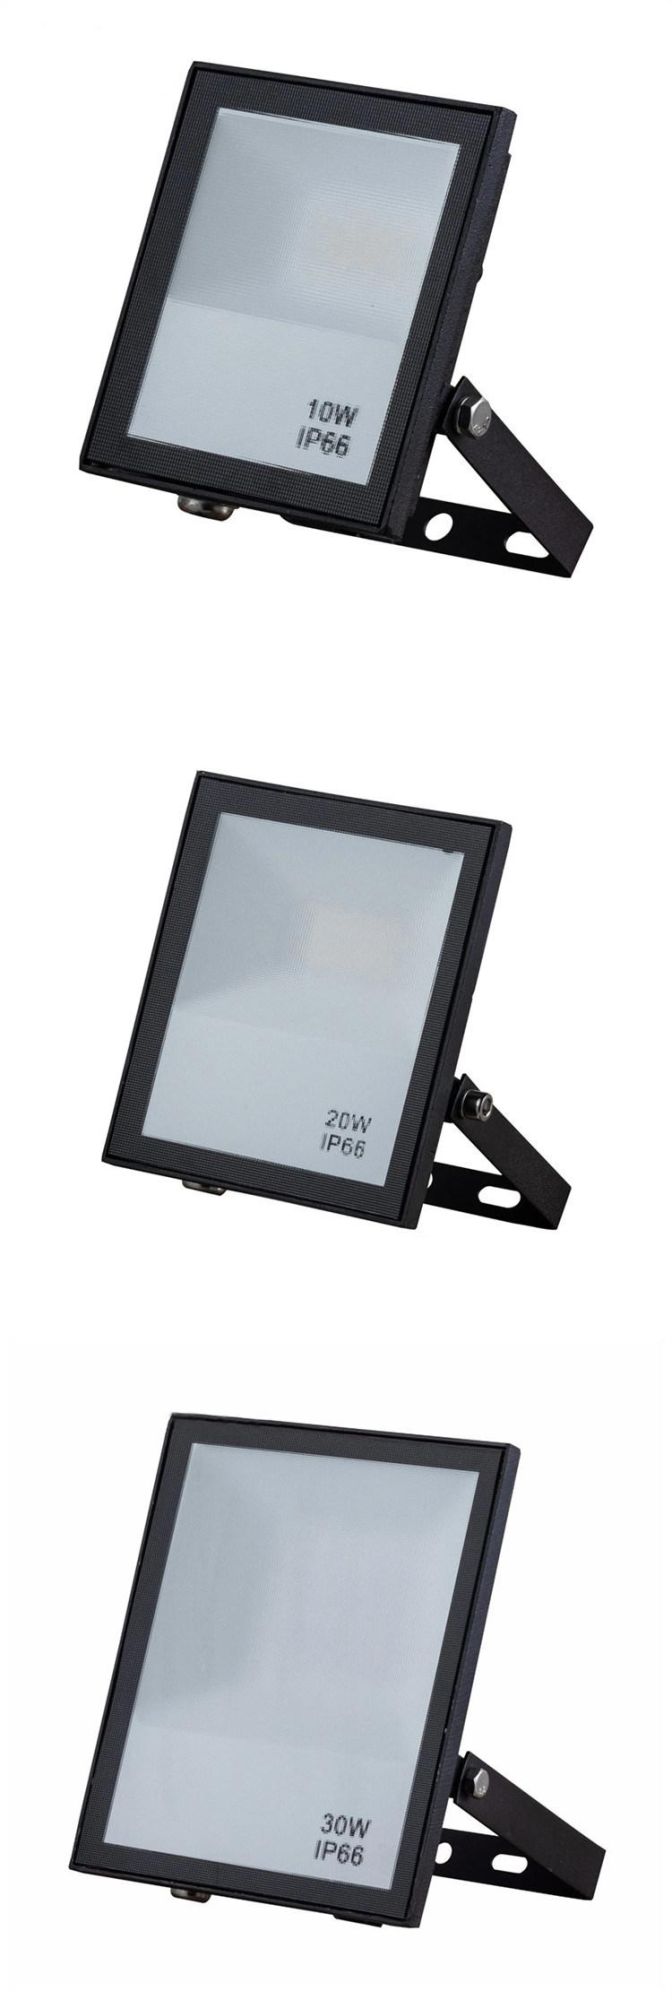 Factory Price RGB AC100-265V 150W with High Quality LED Flood Light Waterproof IP66 for Outdoor Lighting